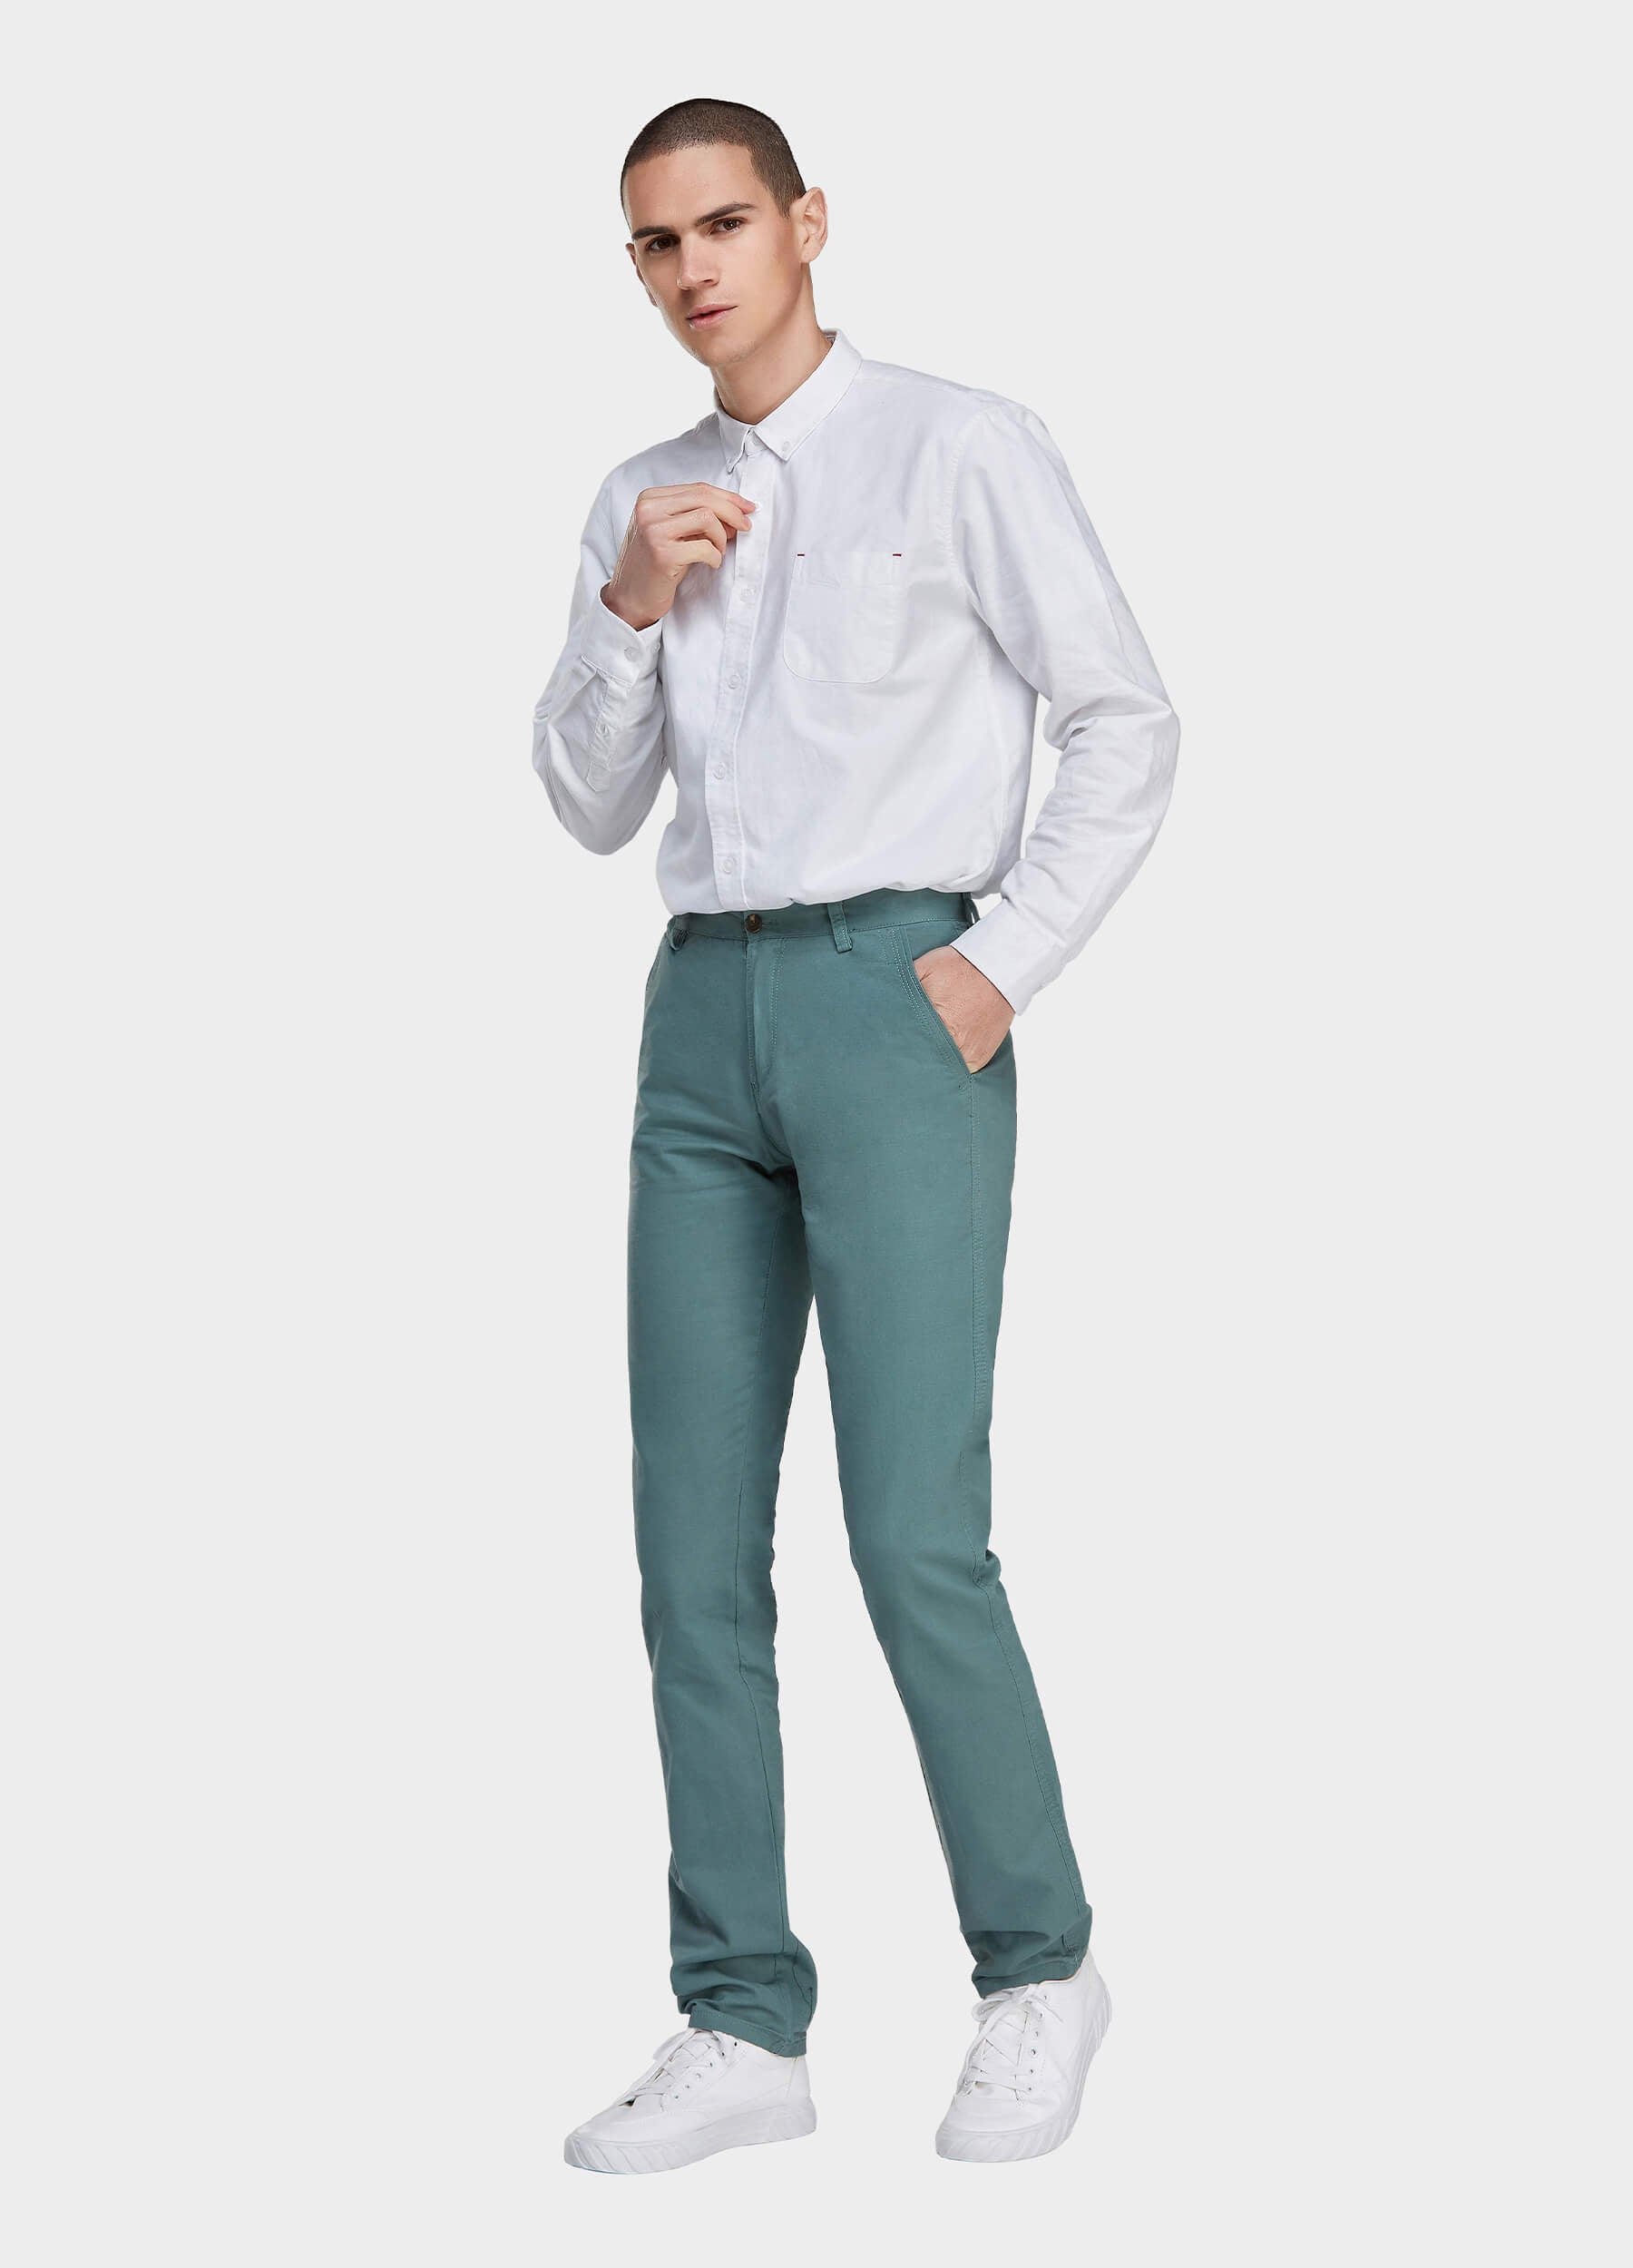 Men's Fall Straight Leg Zip Fly Button Closure Slant Pocket Casual Trousers-Matcha side view